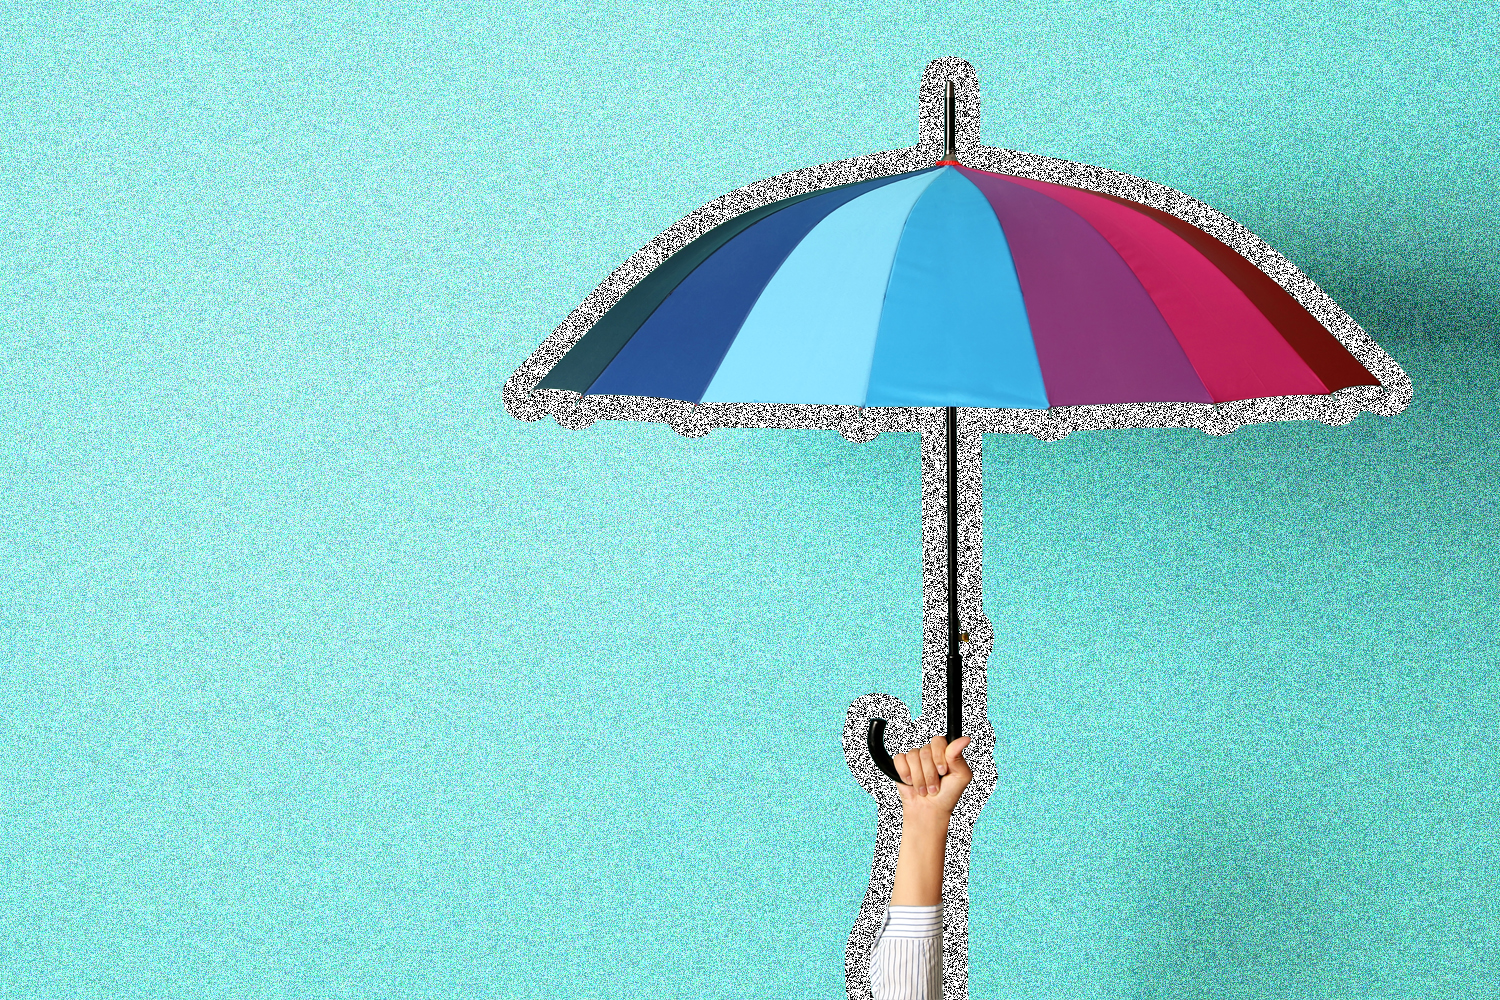 Image of a hand holding a multi-color umbrella against a turquoise background.